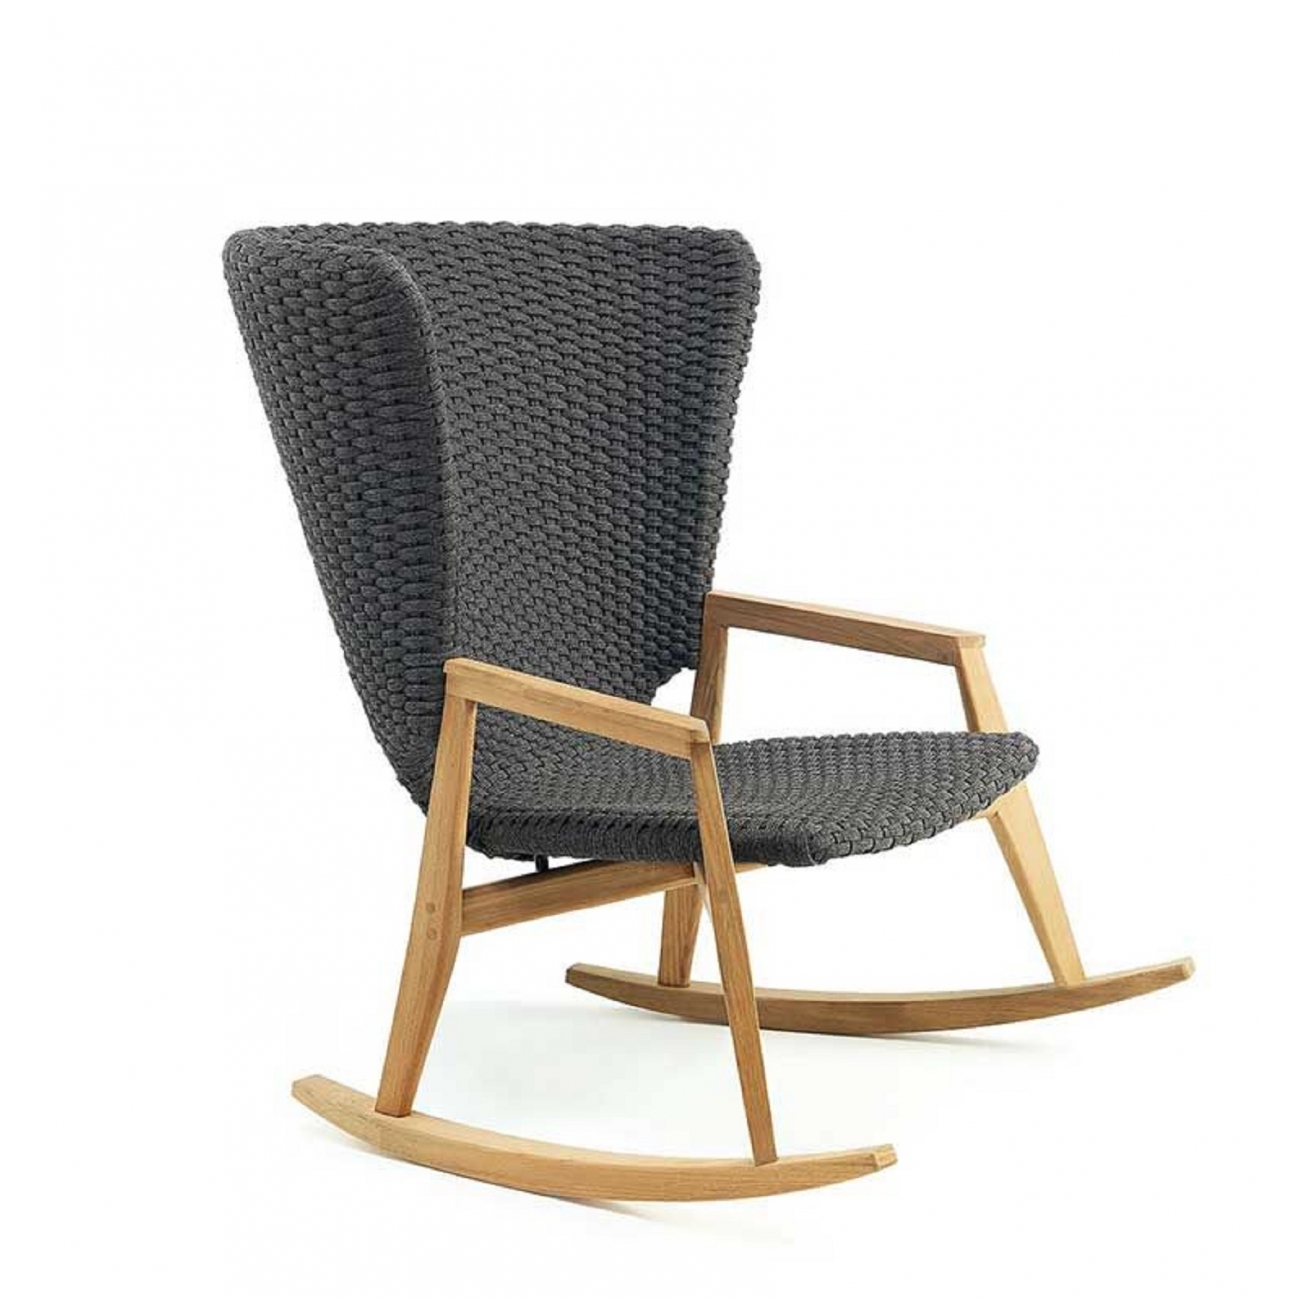 ETHIMO KNIT ROCKING CHAIR